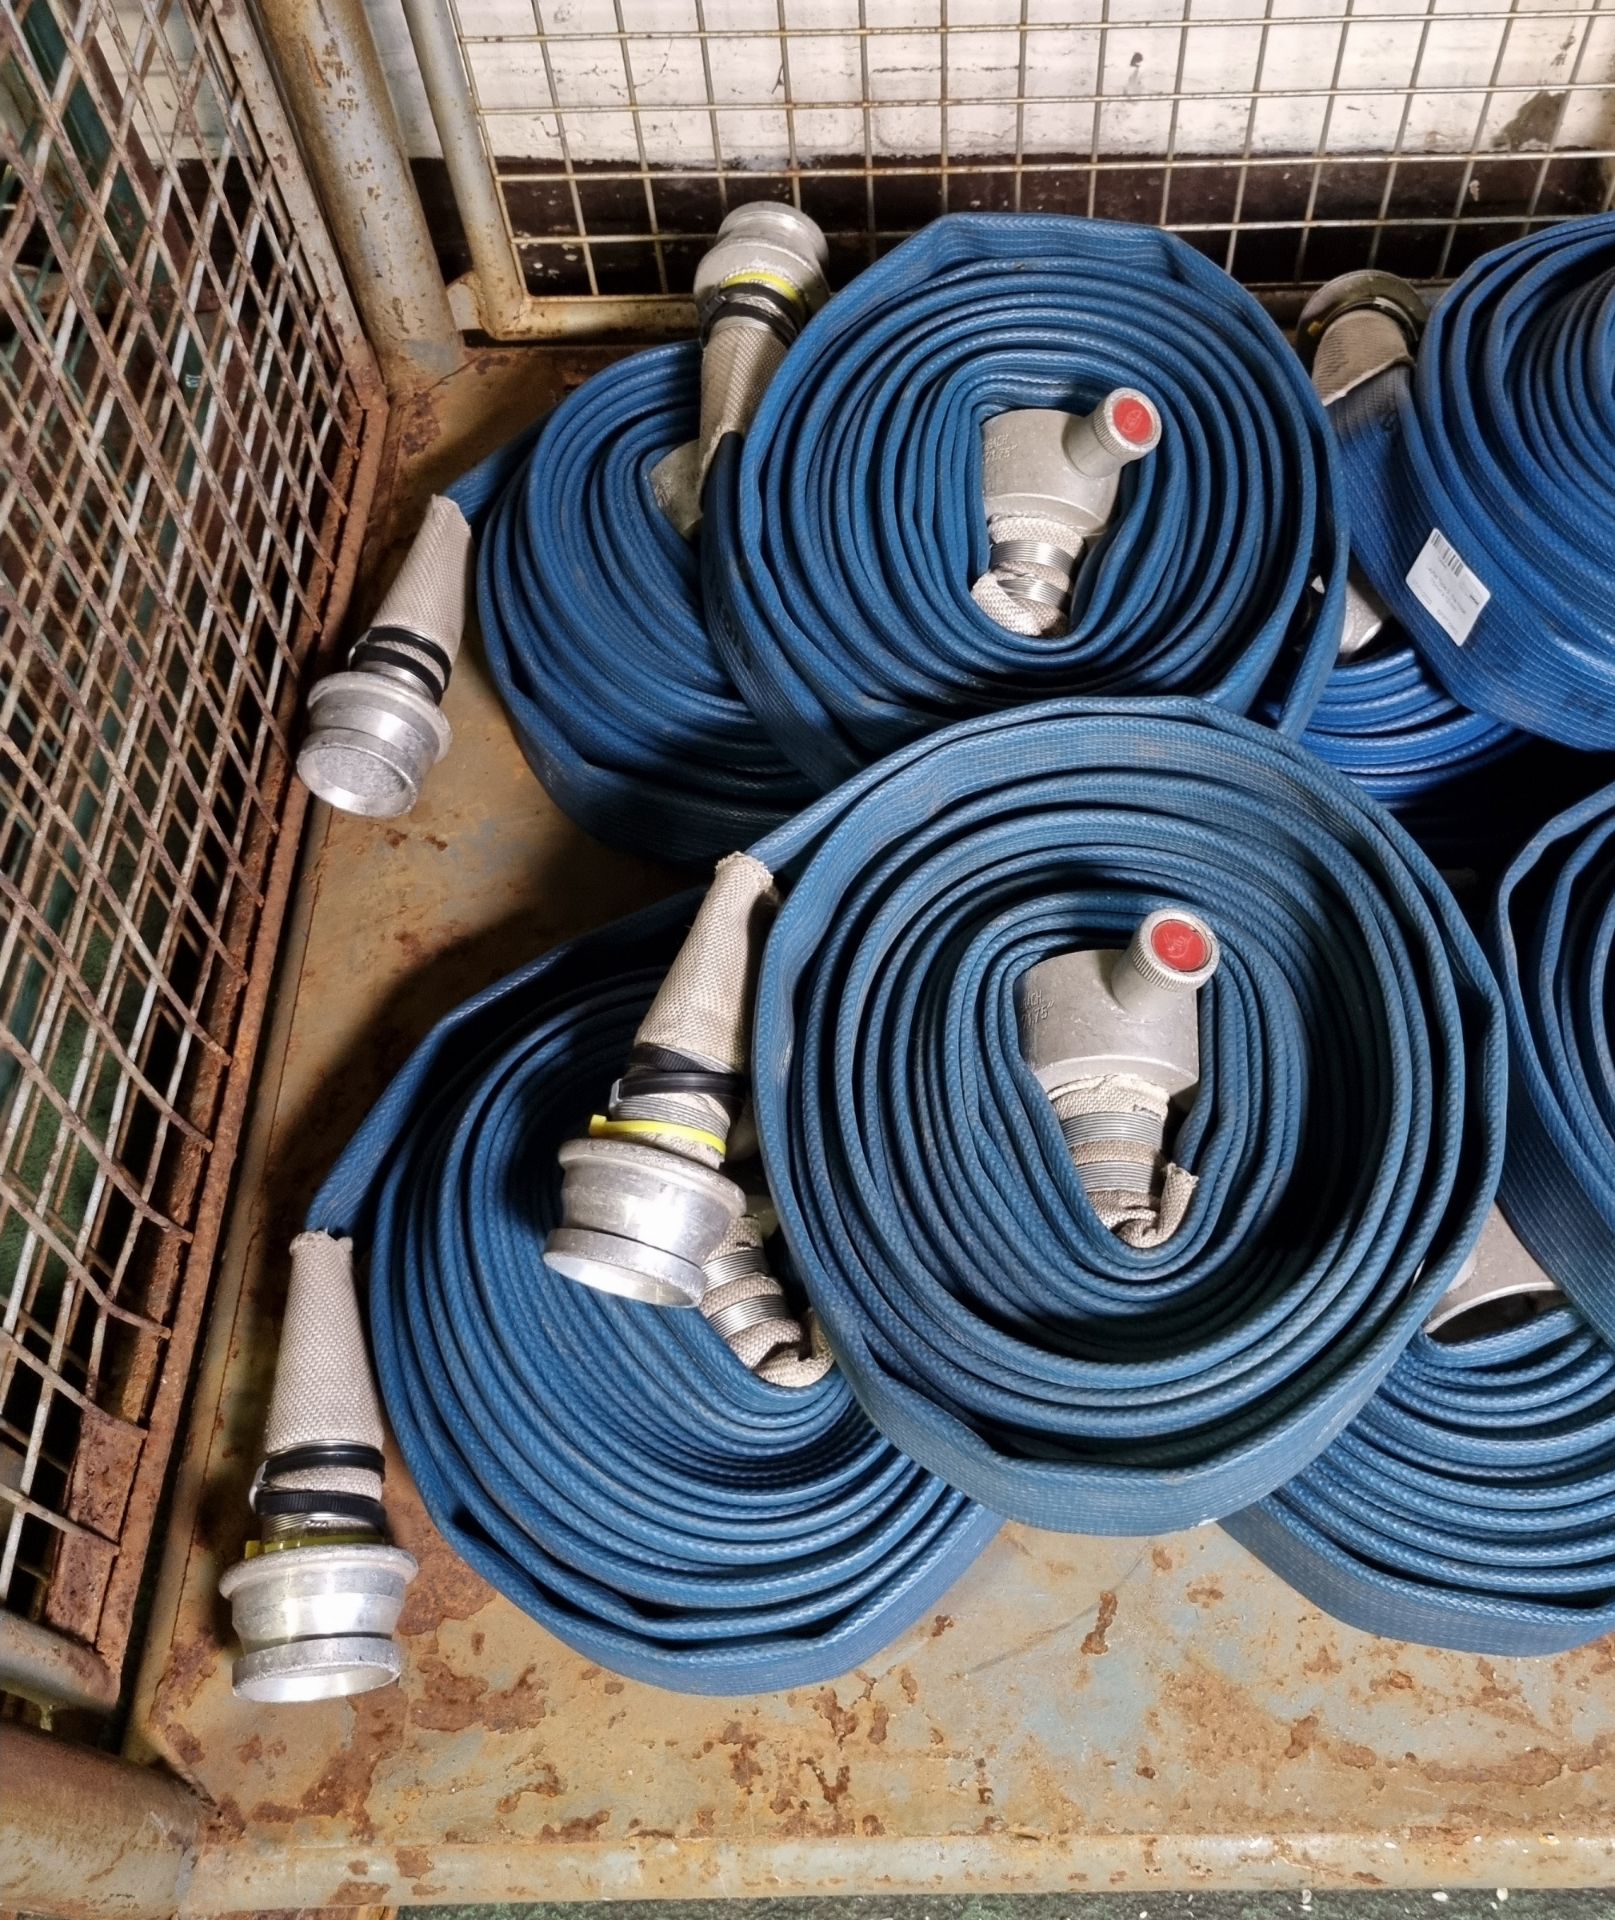 10x Layflat Type-3 fire hoses 75mm x 12 mtr - Image 3 of 3